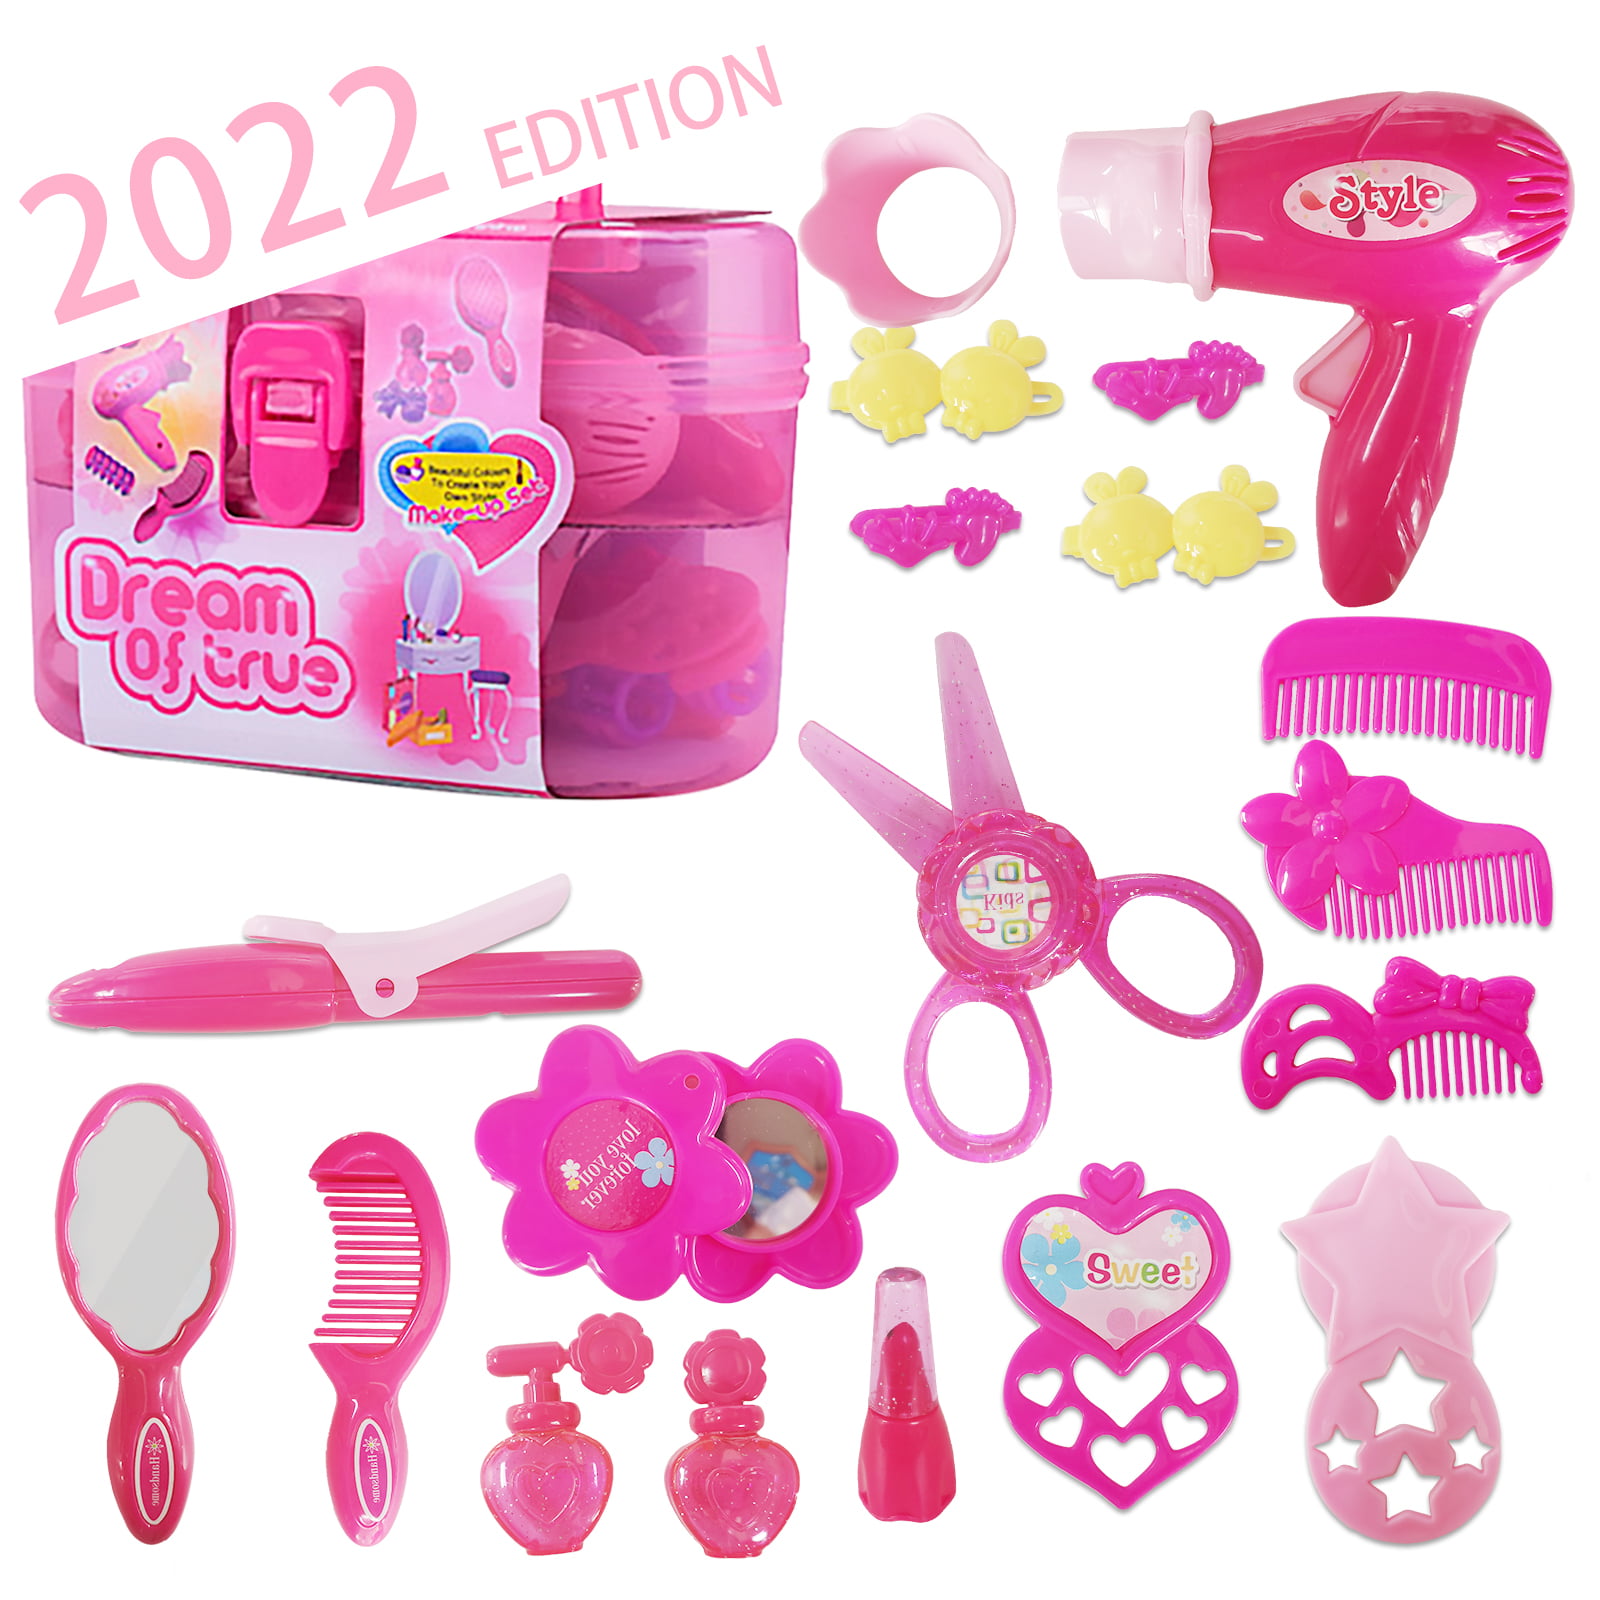 17 Piece Kids Makeup Kit, Beauty Vanity Hair Styling Set with Make Up Case  and Hair Dryer, Pretend Play Set and Cosmetic Set for Toddler Girls -  